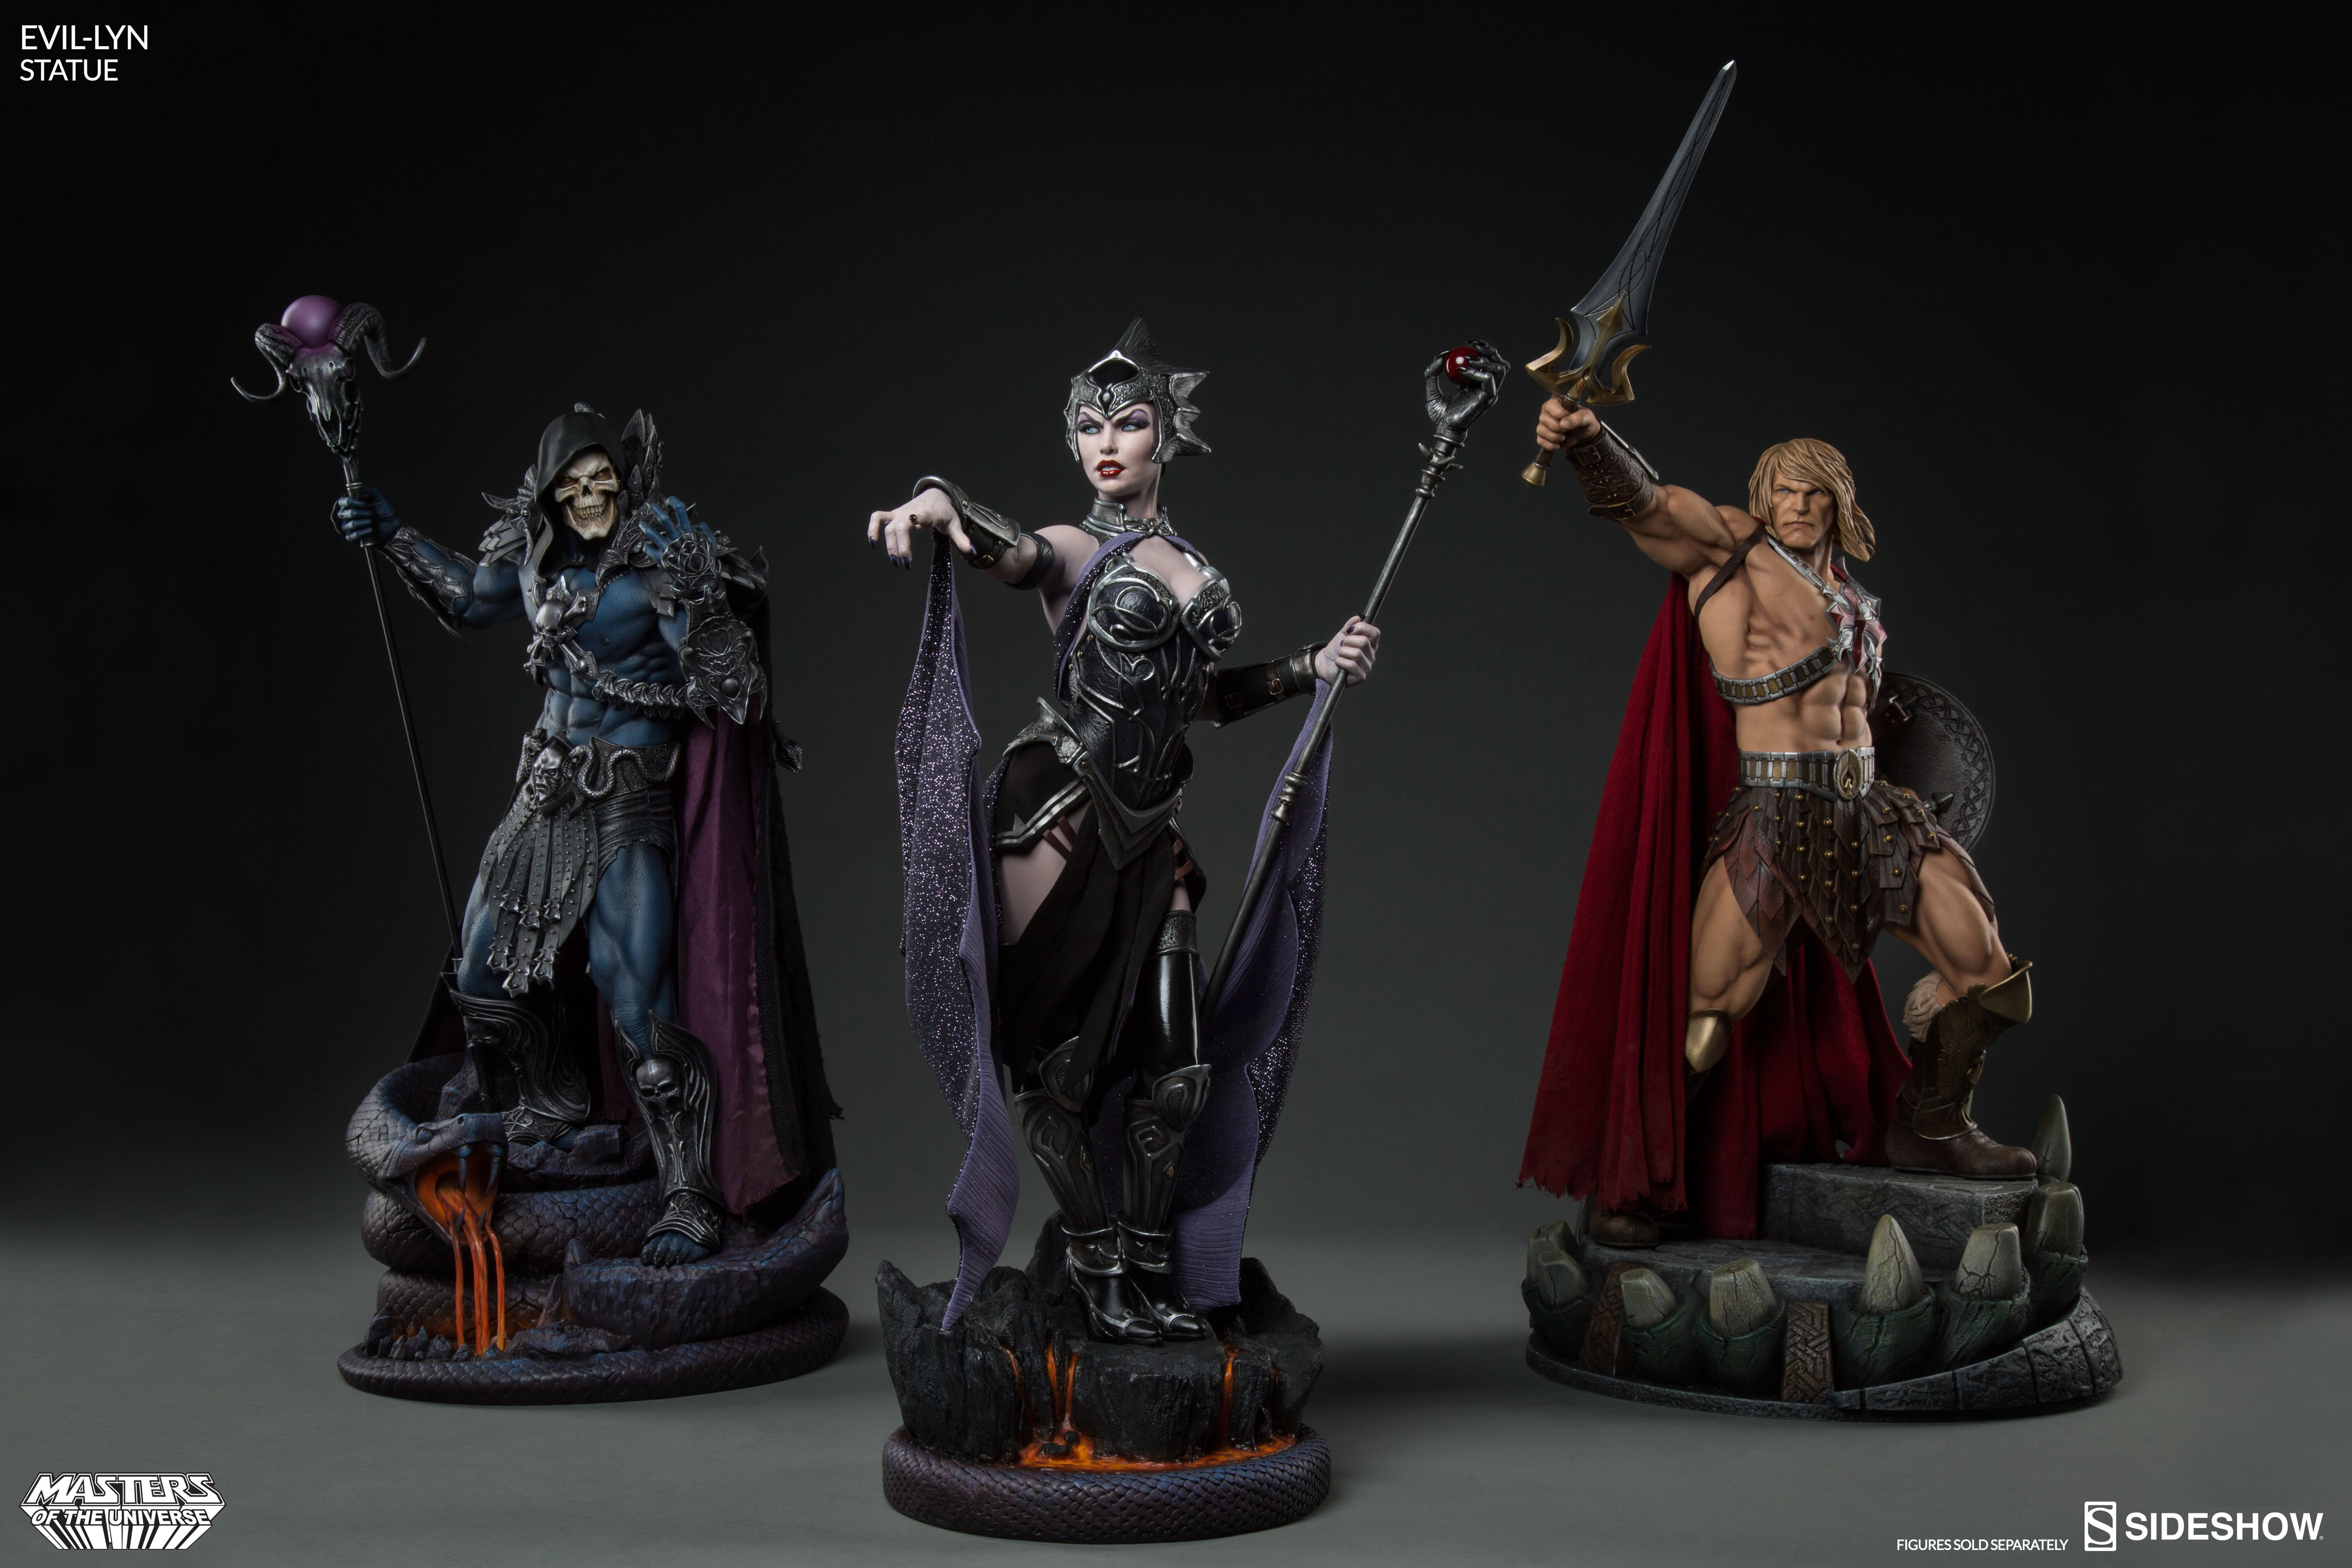 http://www.sideshowtoy.com/wp-content/uploads/2016/03/masters-of-the-universe-evil-lyn-statue-200461-17.jpg